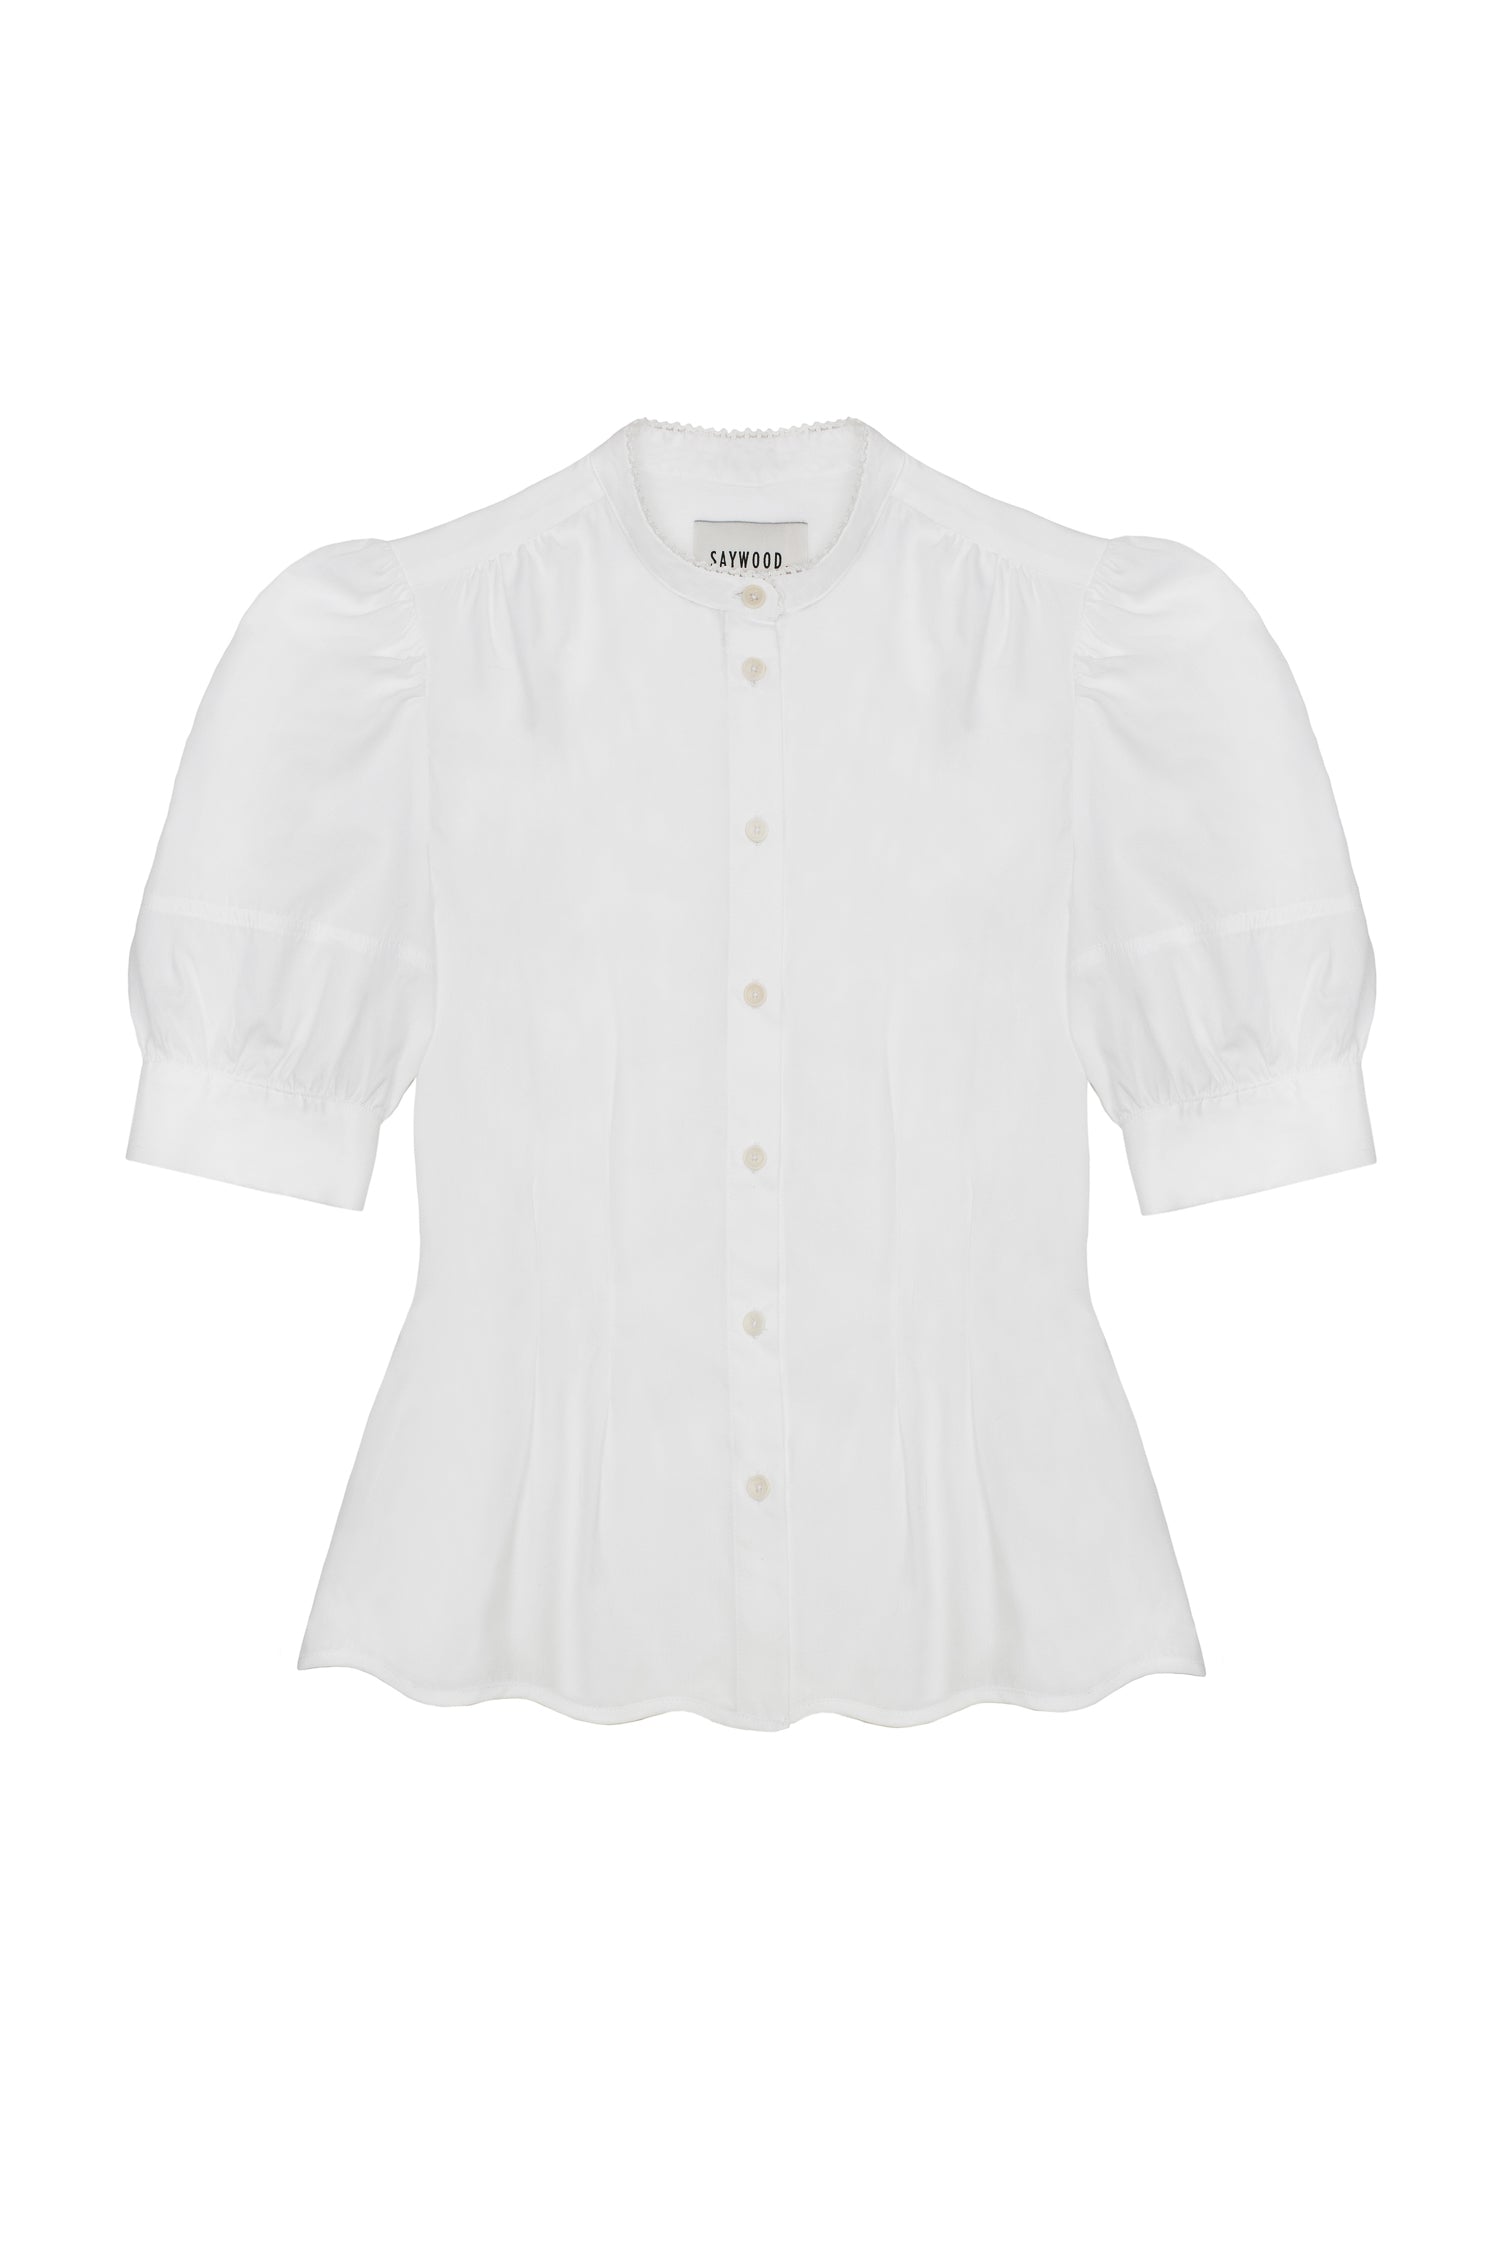 Womens white puff sleeve blouse. Scalloped hem and soft darts at the waist. Lace trim on grandad collar.